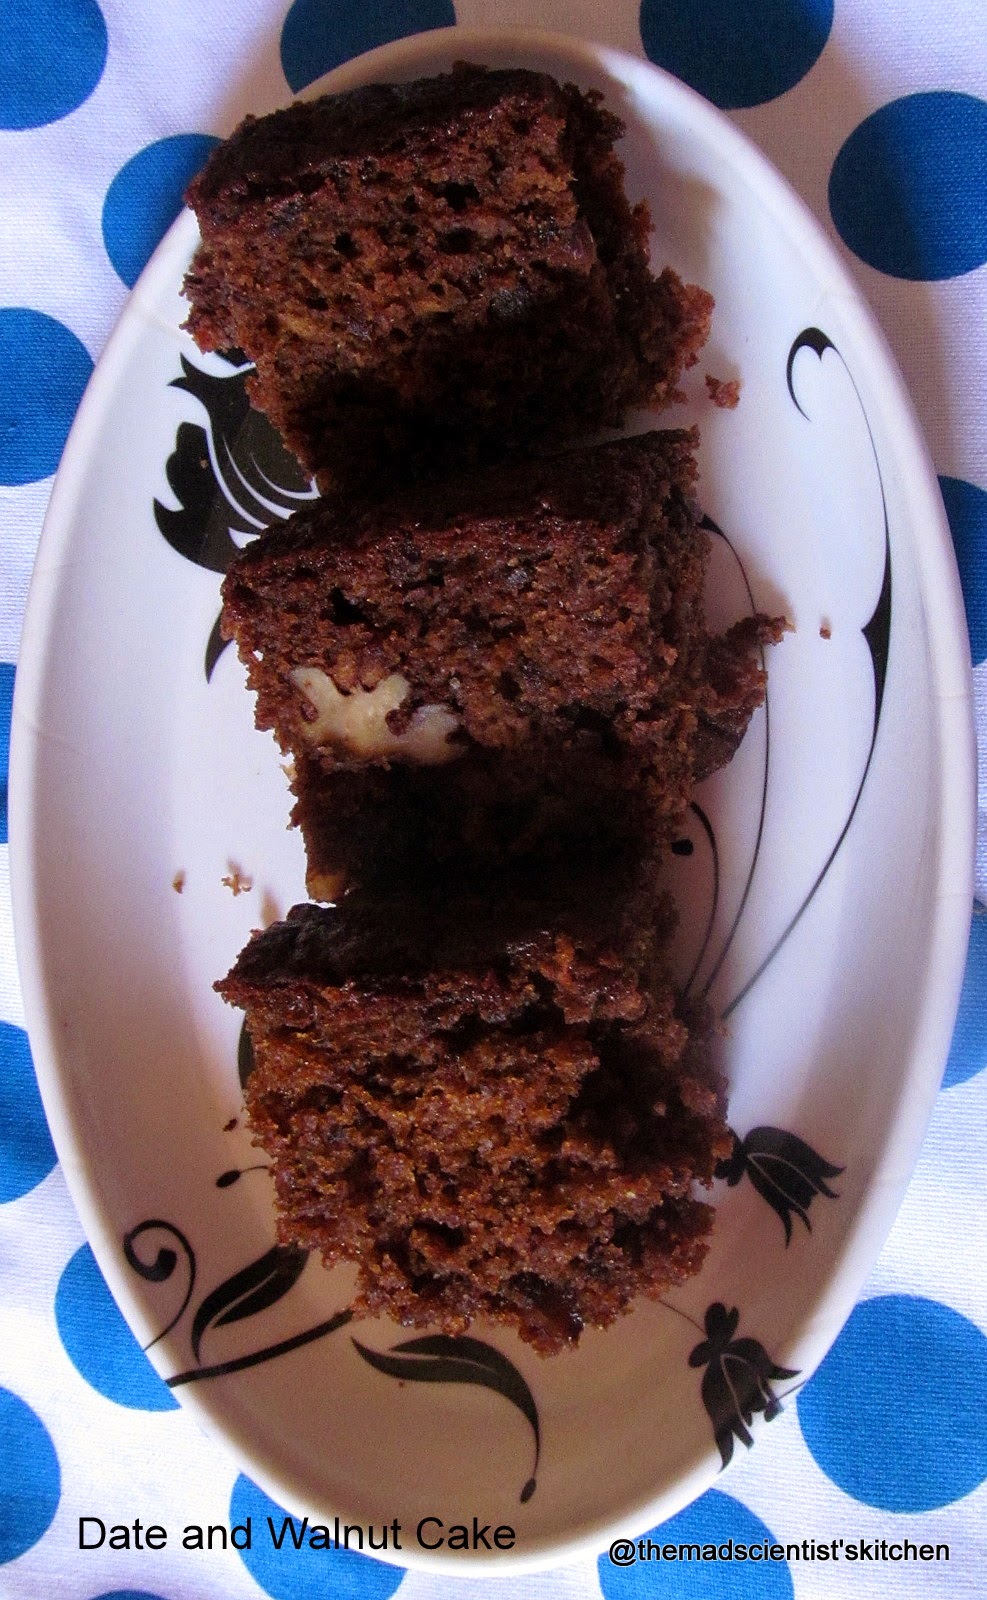 Egg-less Date and Walnut Cake